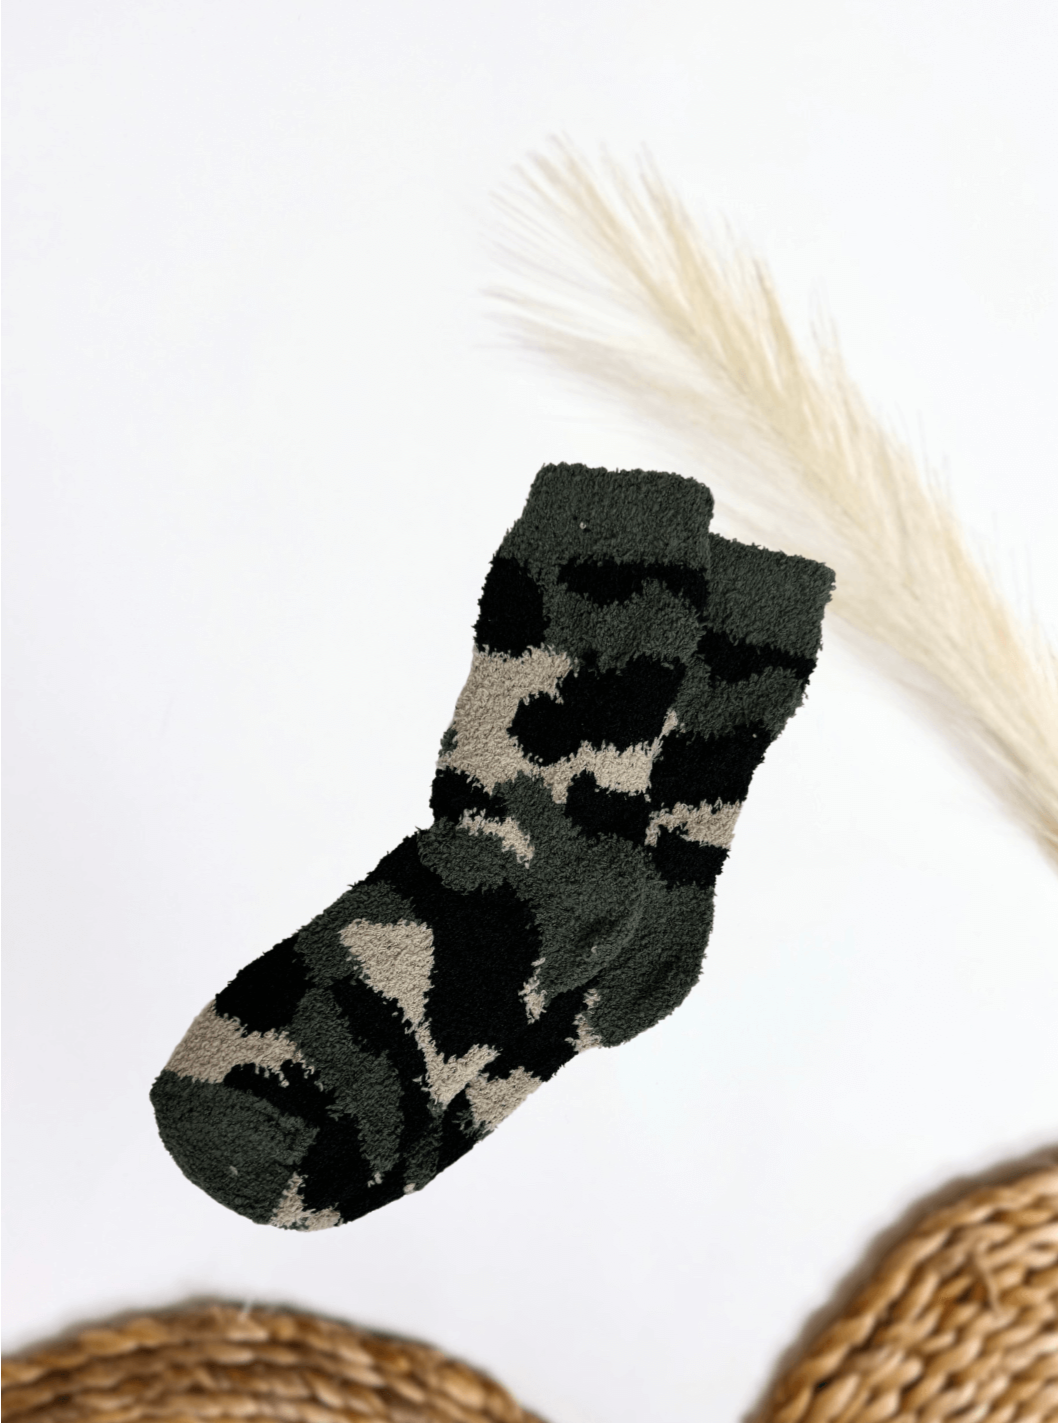 Camouflage ComfyLuxe Fuzzy Winter Crew Knit Socks One Size Fits Most (Adult Sizes 6-11) 100% Poly Microfiber